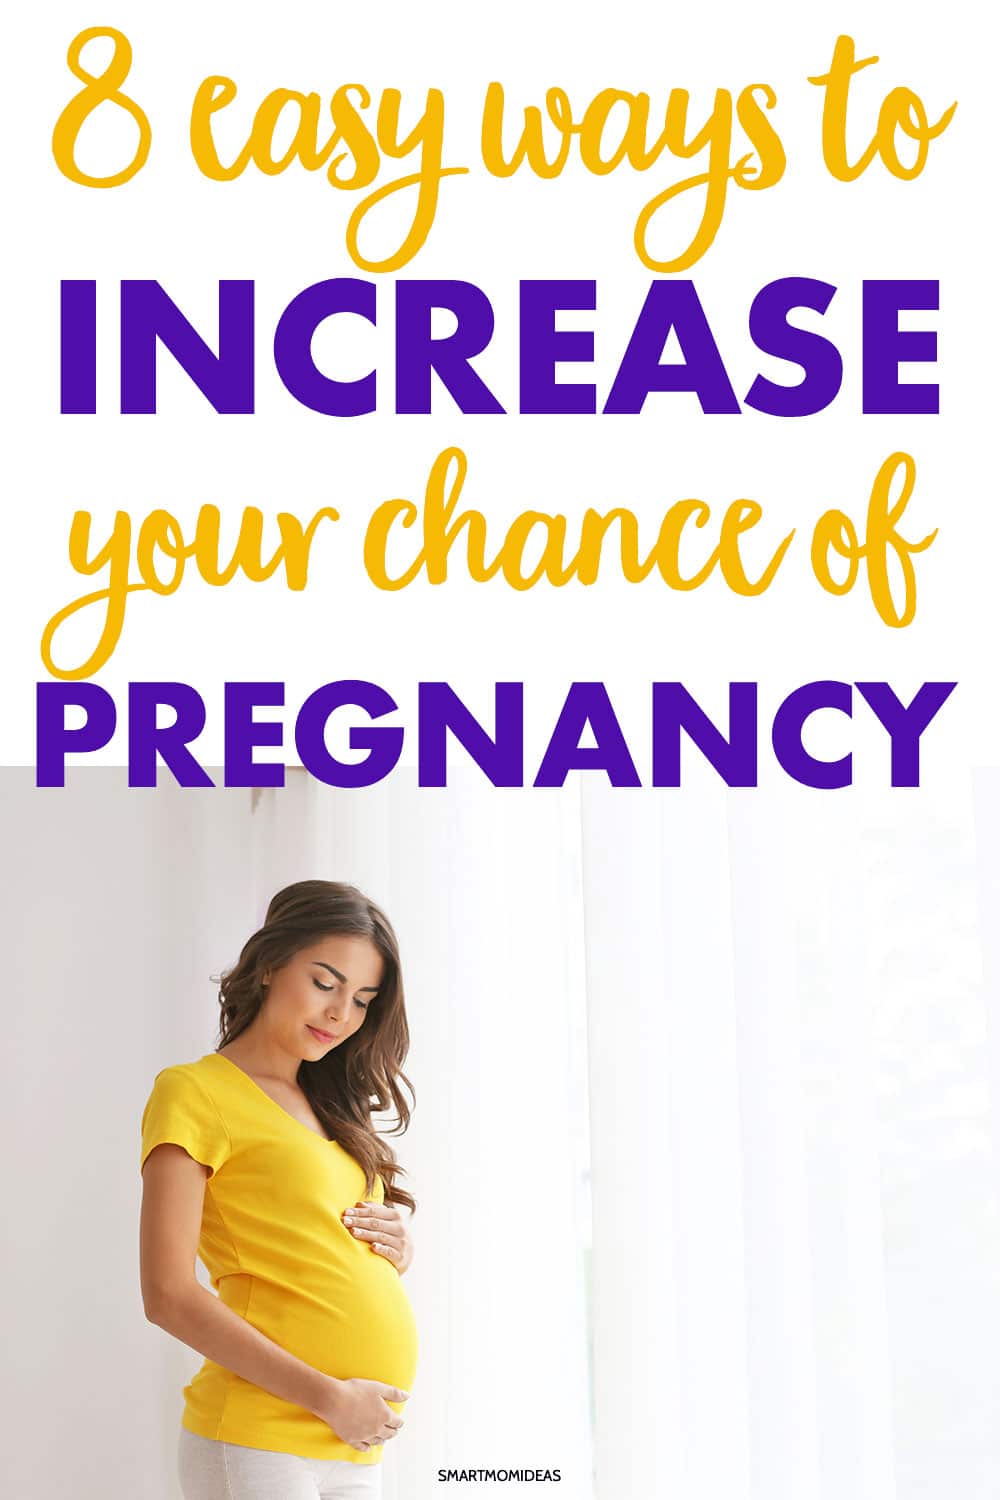 With statistics pregnant of precum getting Chances of